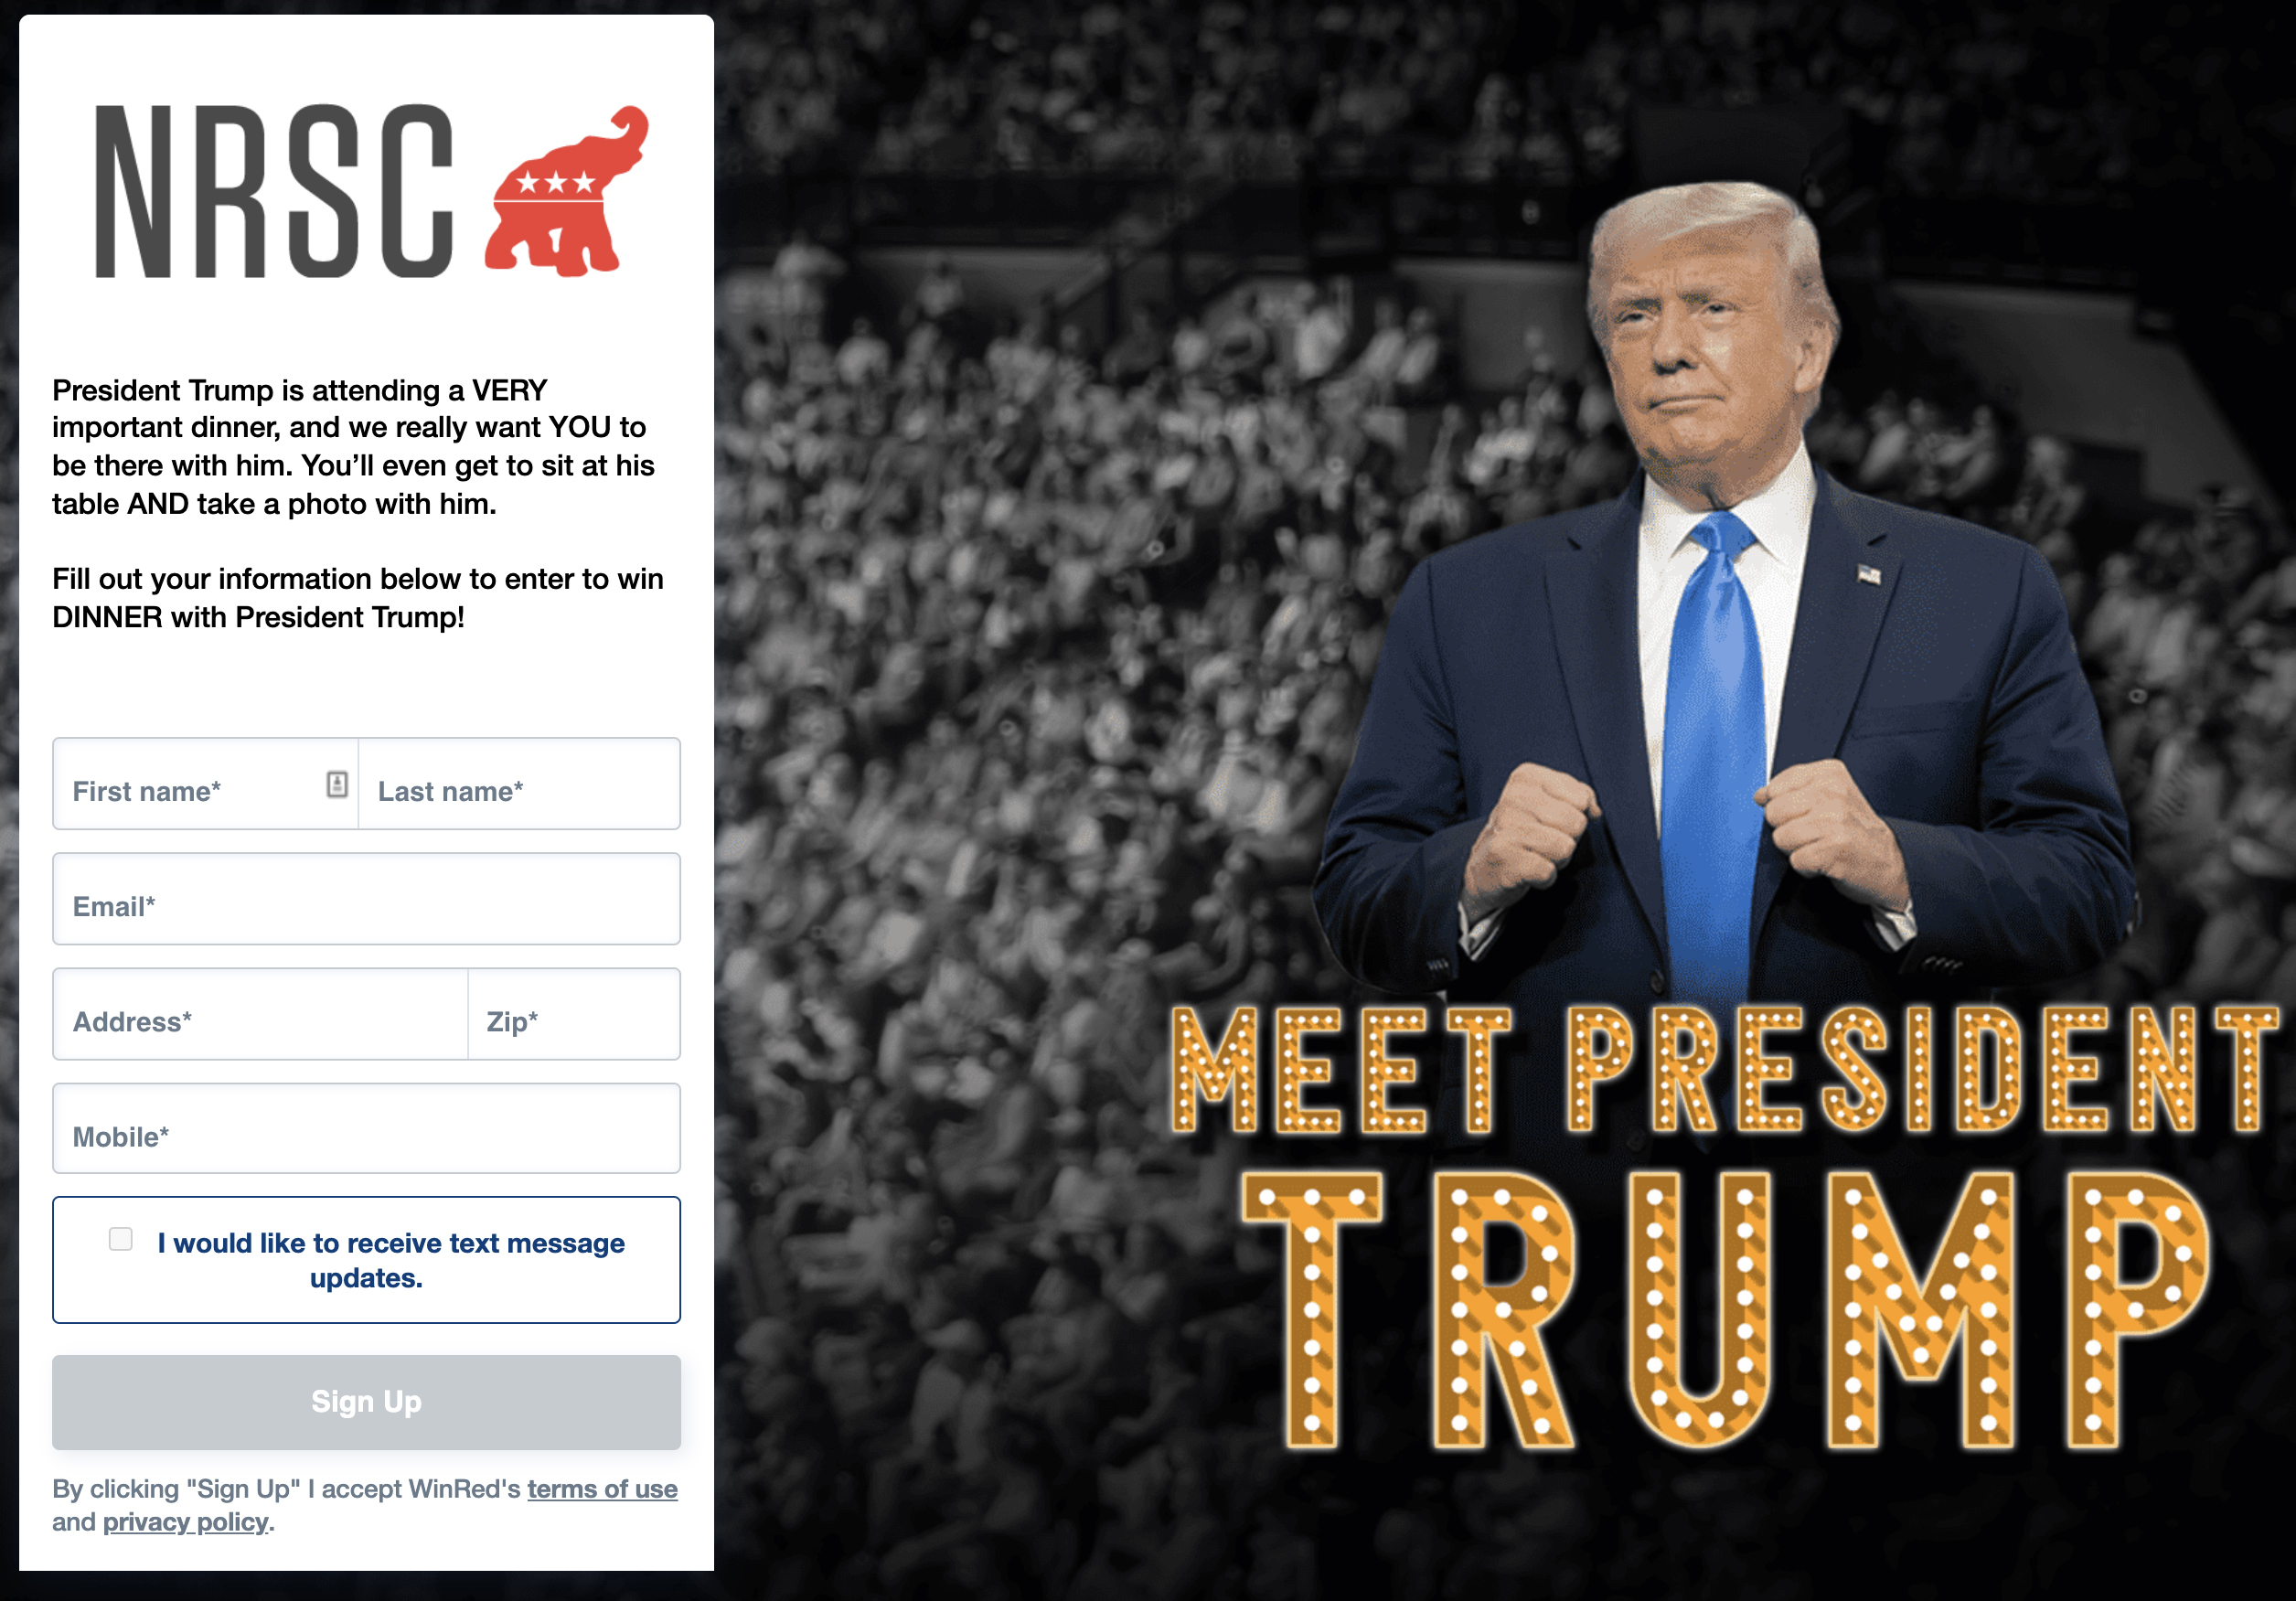 Facebook and Instagram ads from NRSC promised a dinner with Trump and Stefanik.